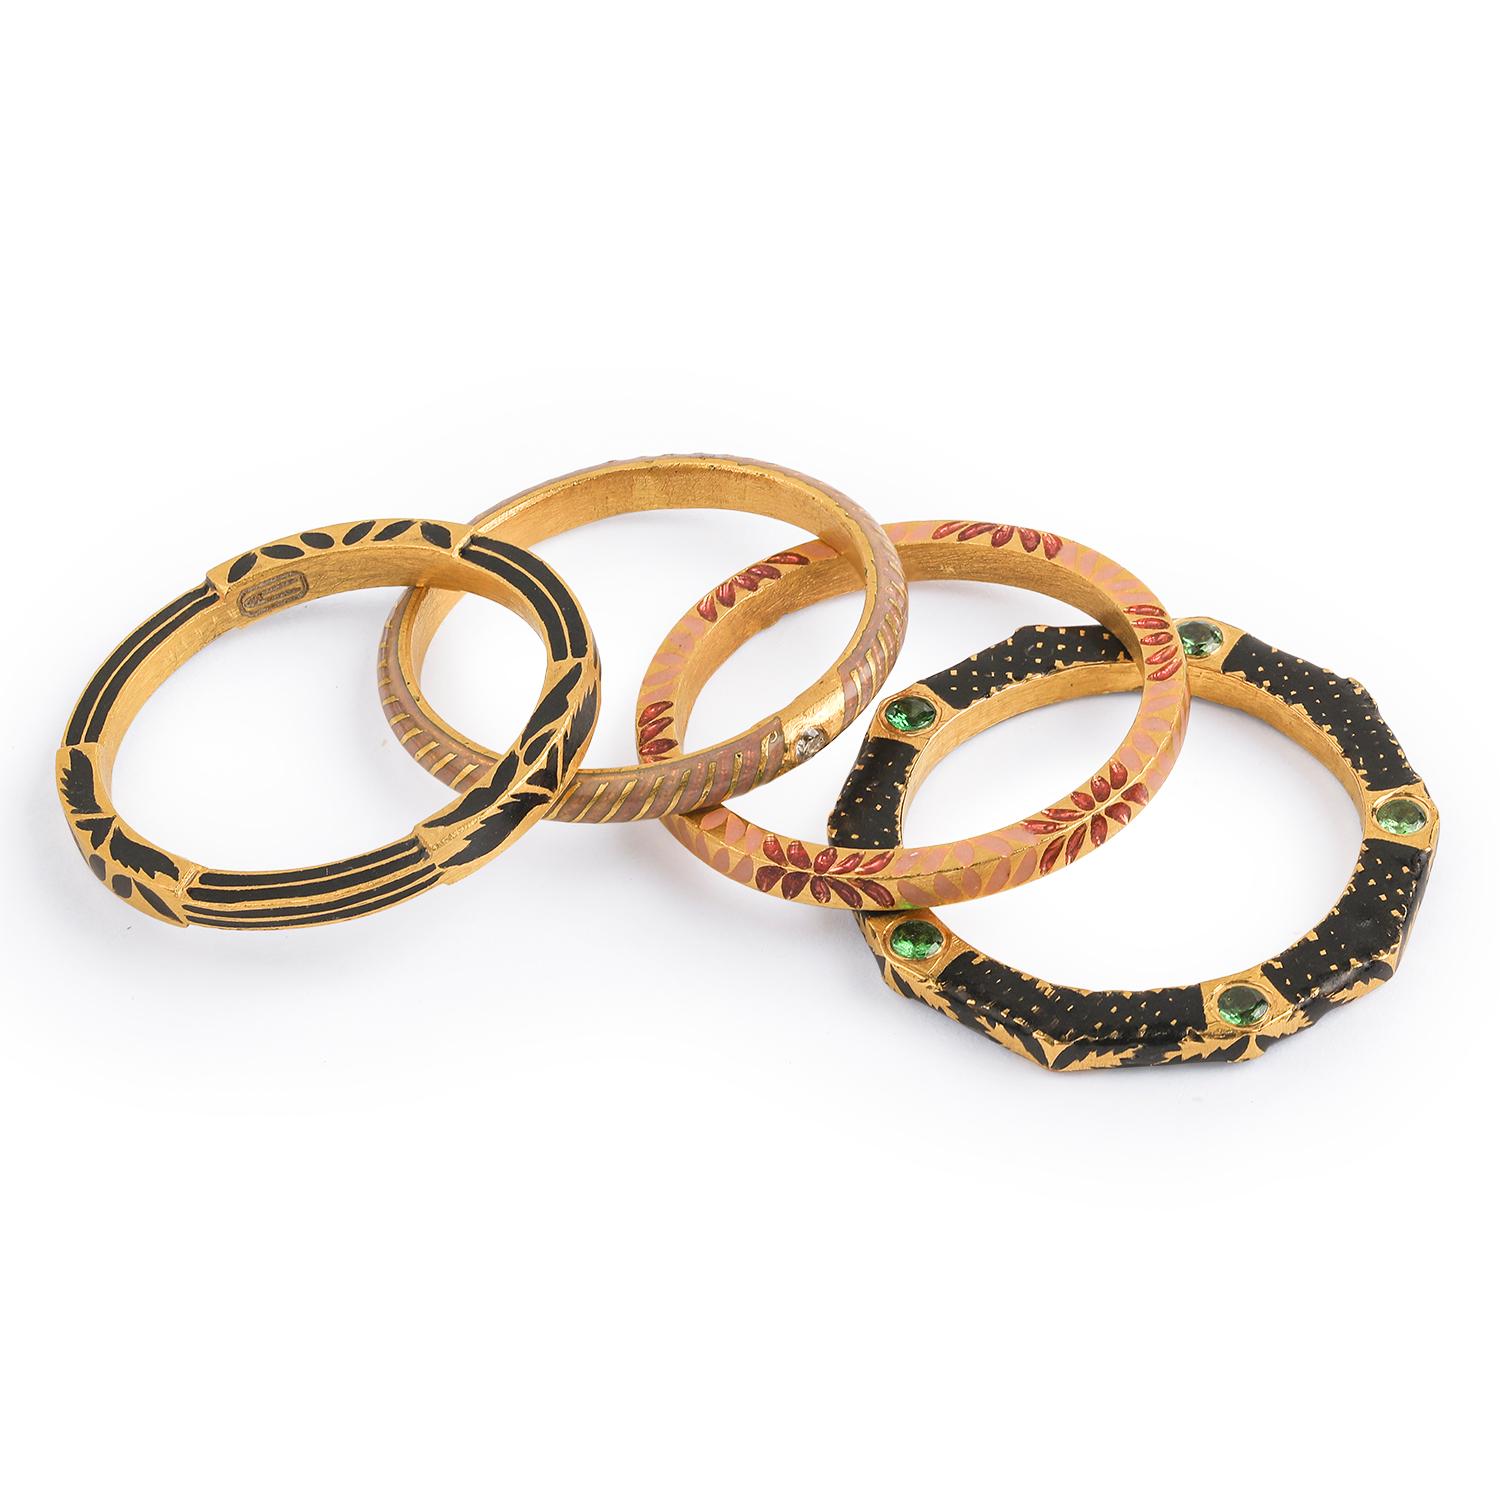 For Sale:  22K Gold Handmade Floral Enamel Stackable Infinity Band Rings Set of 4 by Agaro 3